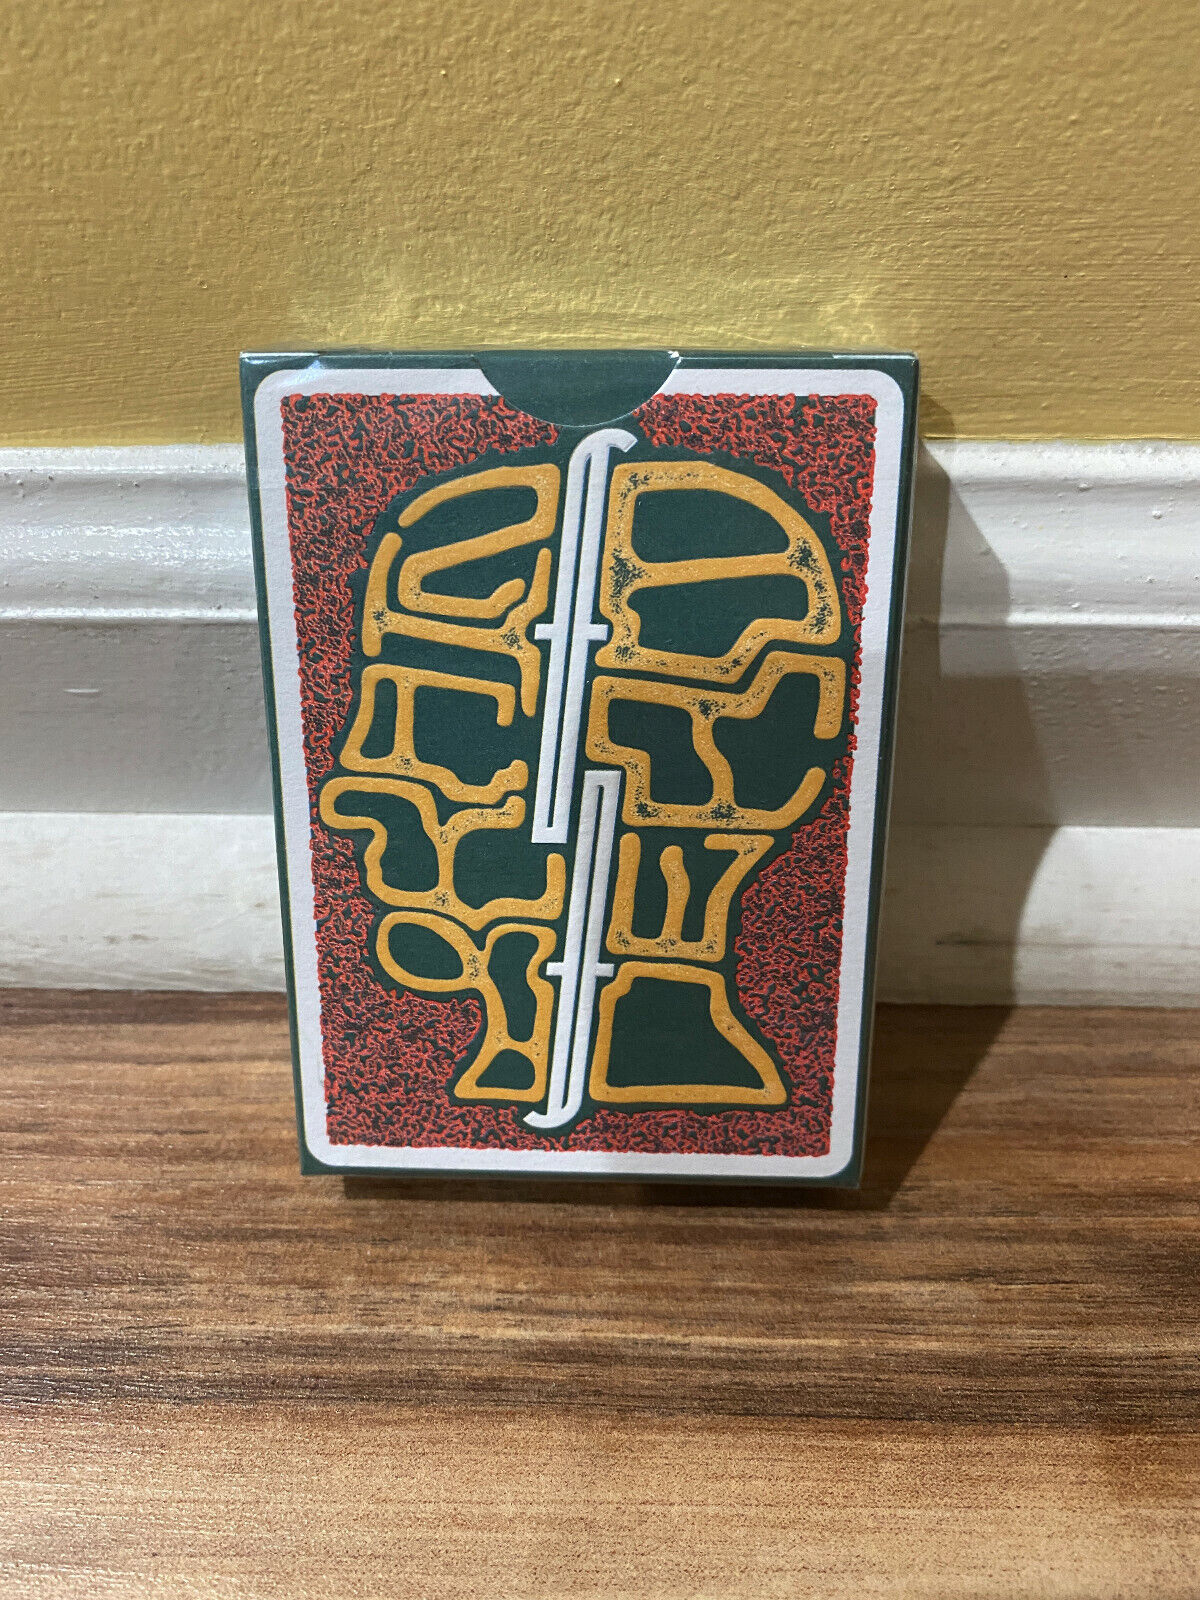 Brand New Sealed Brain Dead X Fontaine Playing Cards V1